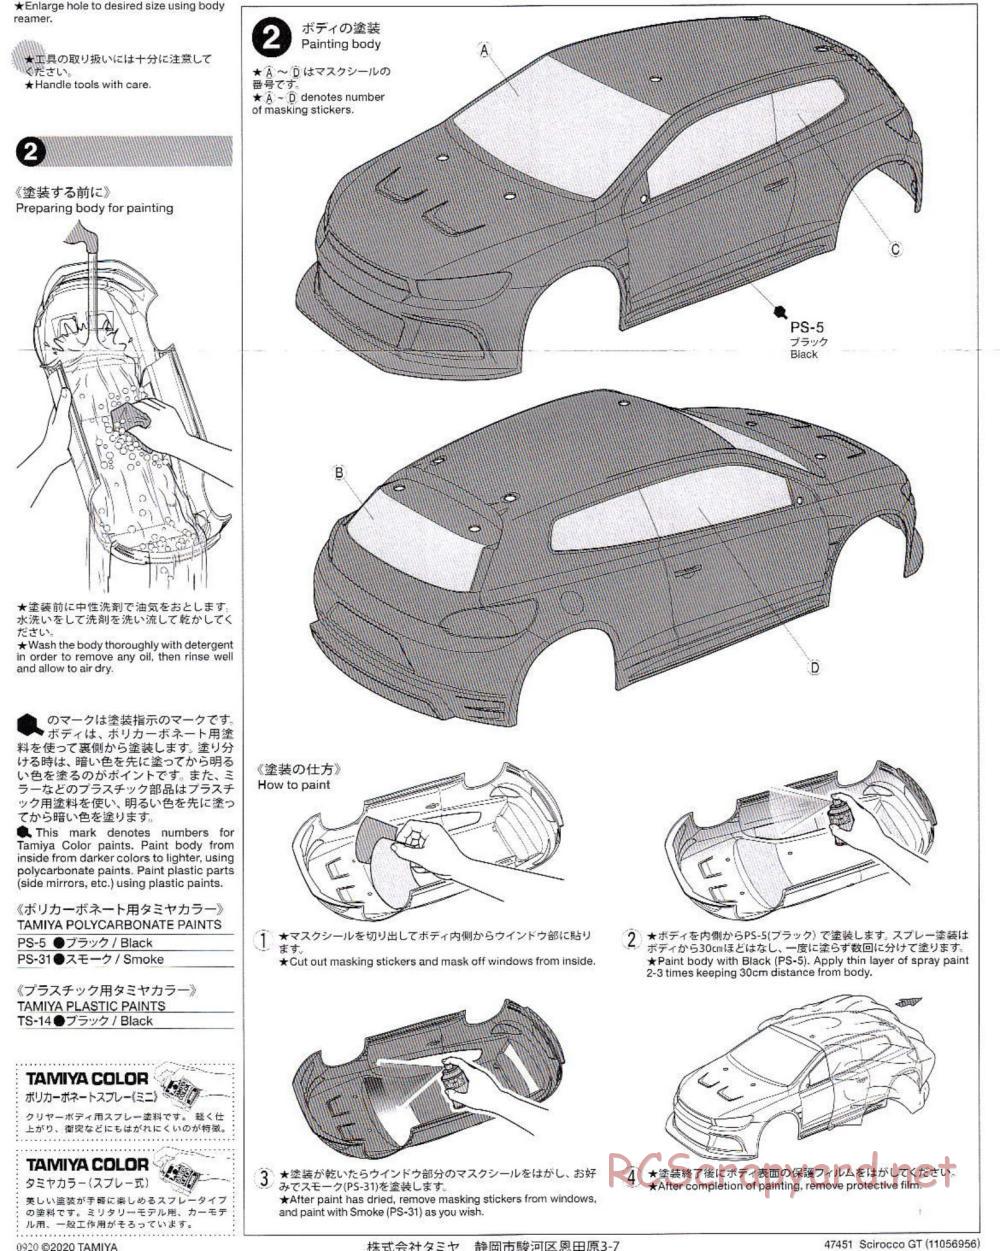 Tamiya - XB Volkswagen Scirocco GT - Drift Spec - TT-01ED Chassis - Body Manual - Page 2